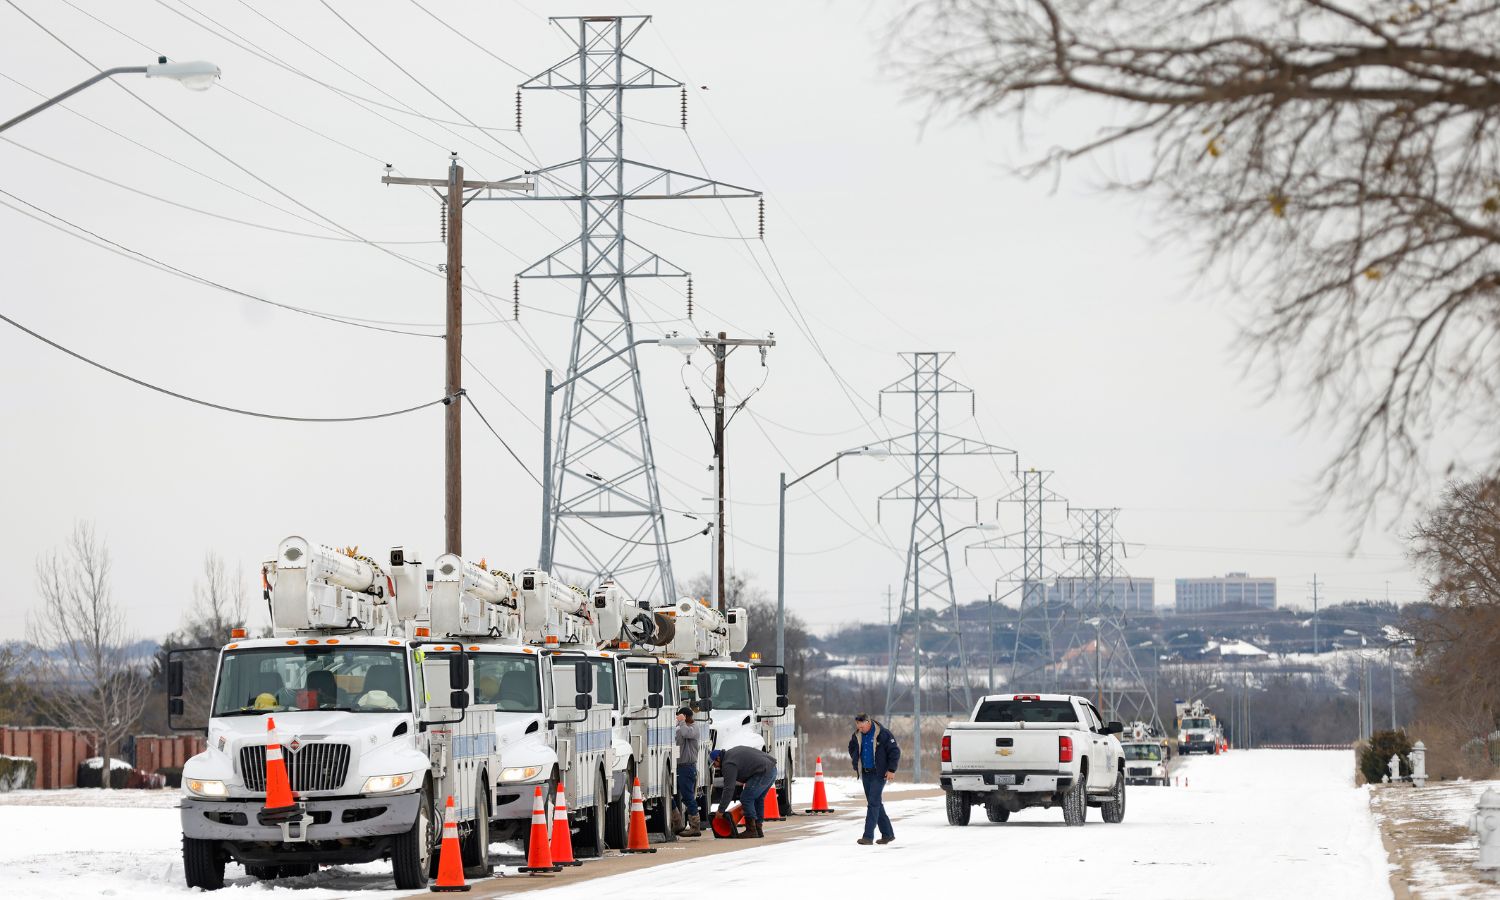 FERC and NERC Review of Winter Storm Gas Failures Lacks Transparency and Key Details